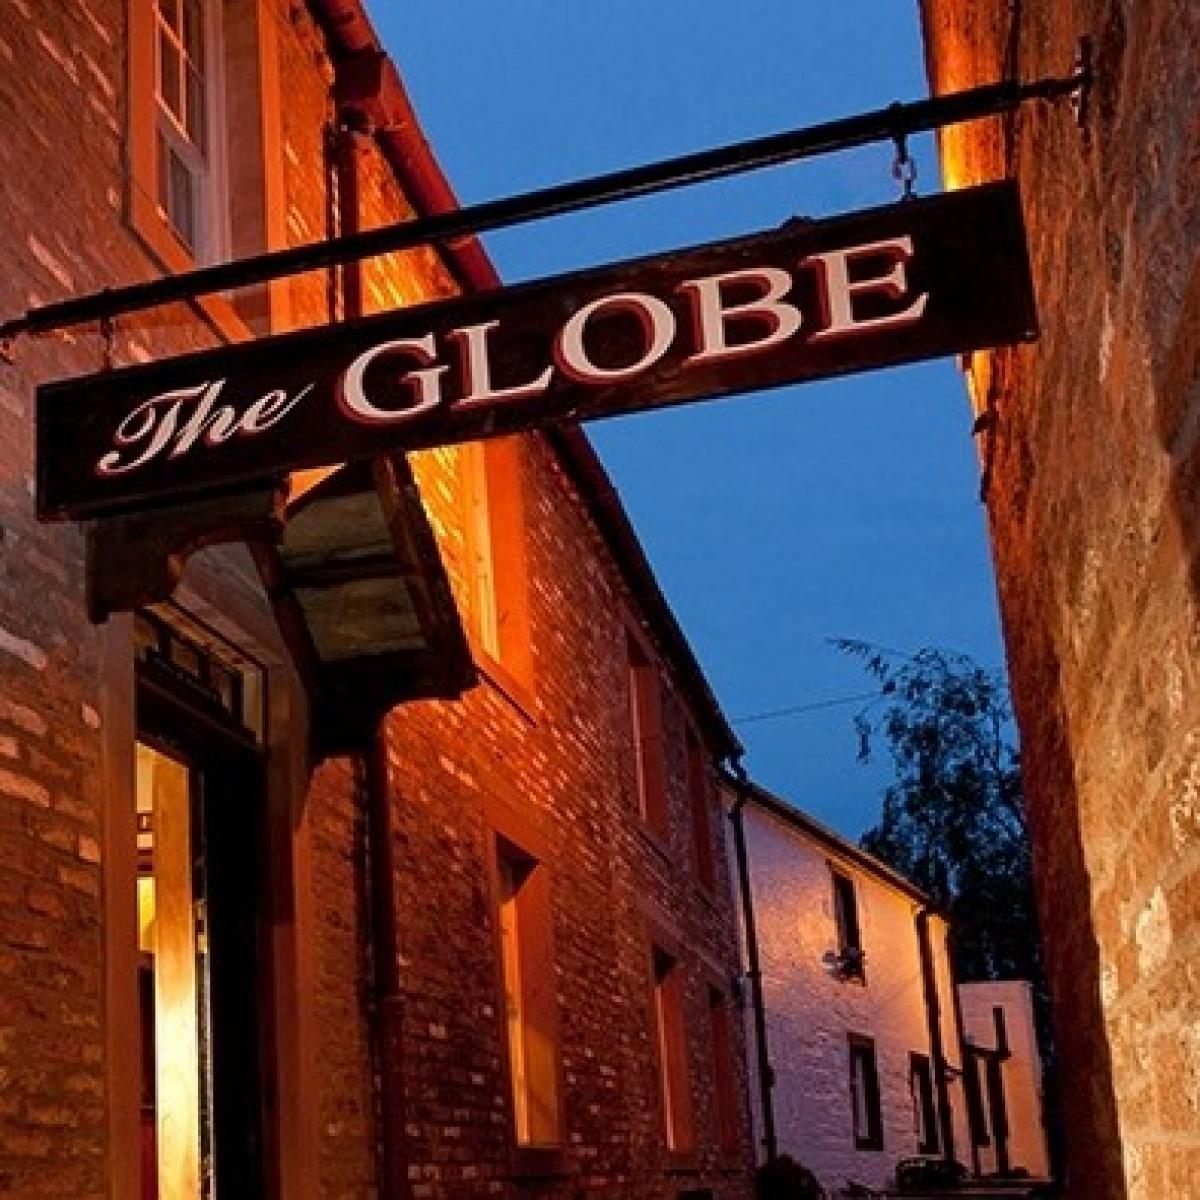 Images from The Globe Inn